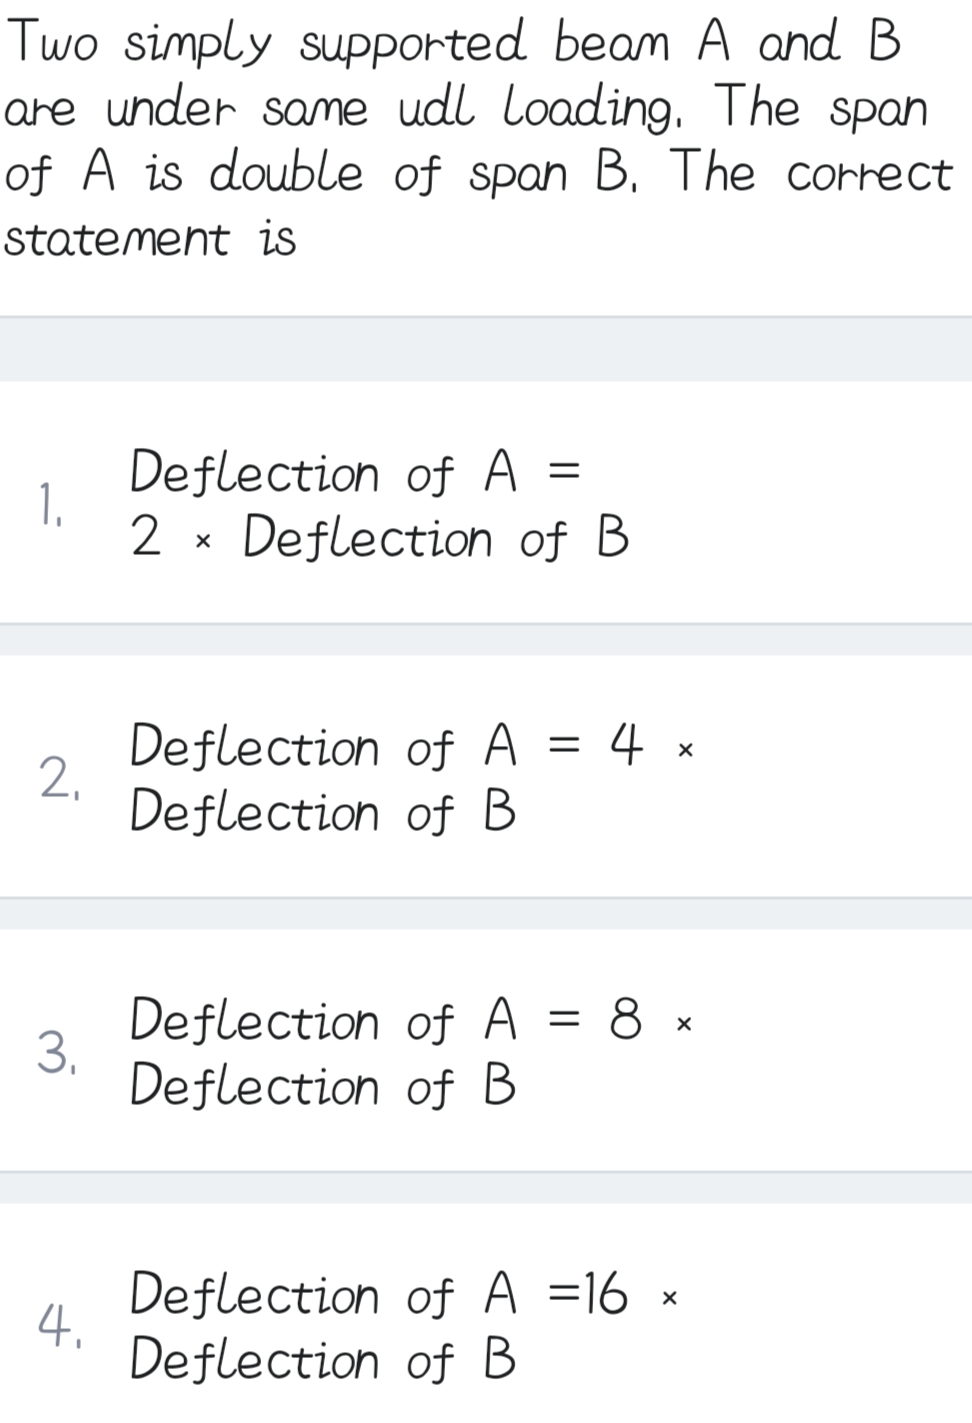 Two simply supported beam A and B
are under same udl Loading. The span
of A is double of span B. The correct
statement is
1.
2₁
3.
4.
Deflection of A =
2x Deflection of B
Deflection of A 4 x
Deflection of B
Deflection of A = 8 x
Deflection of B
Deflection of A =16 ×
Deflection of B